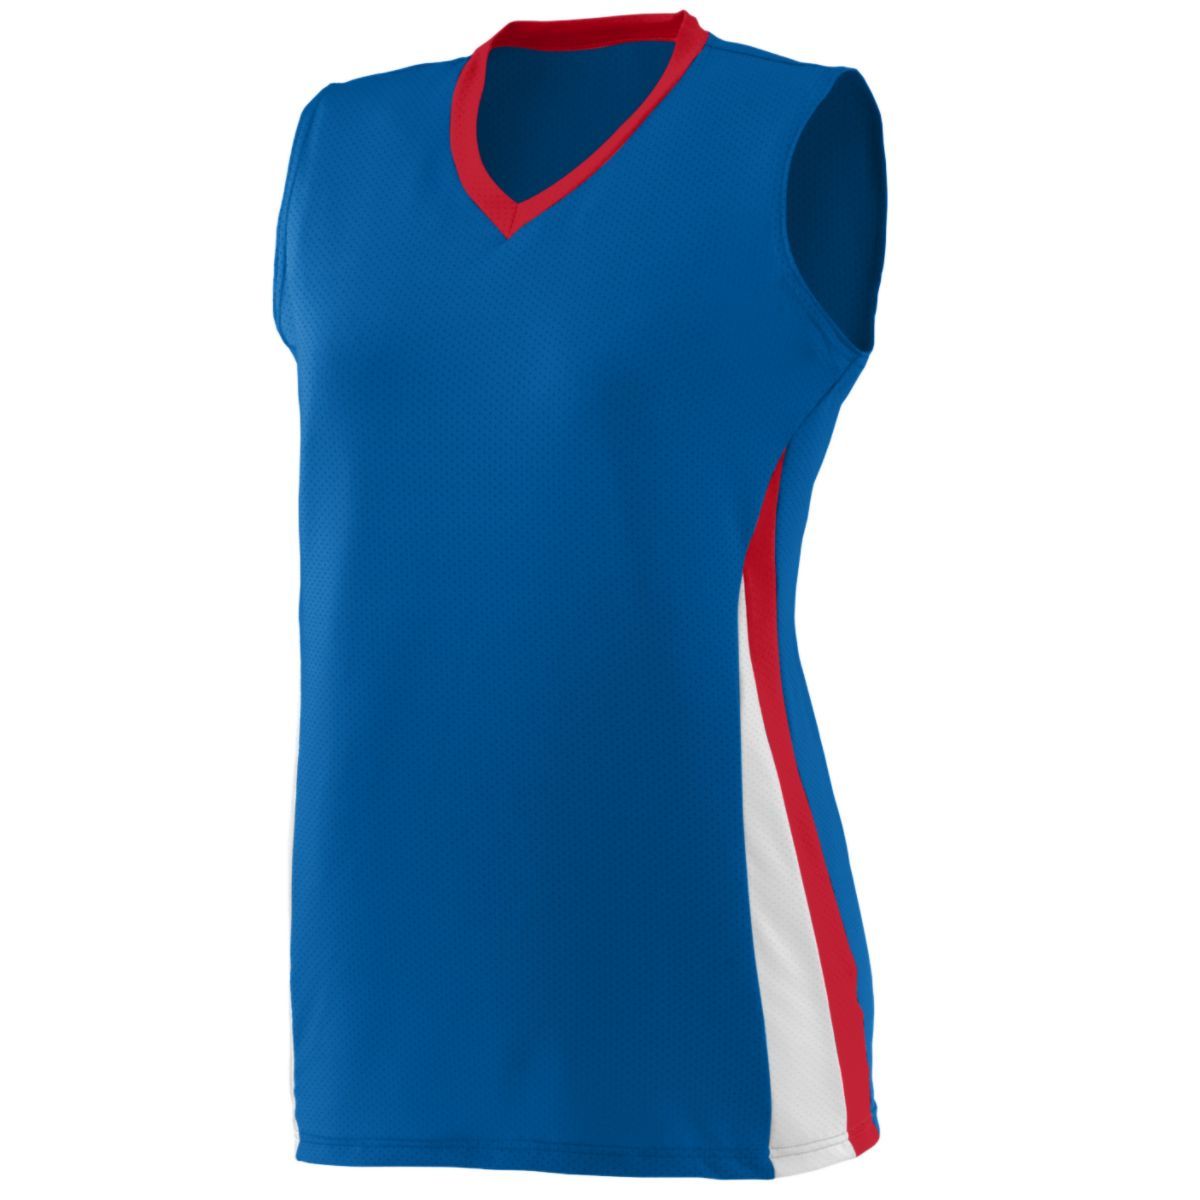 Augusta Sportswear Girls Tornado Jersey in Royal/Red/White  -Part of the Girls, Augusta-Products, Volleyball, Girls-Jersey, Shirts product lines at KanaleyCreations.com